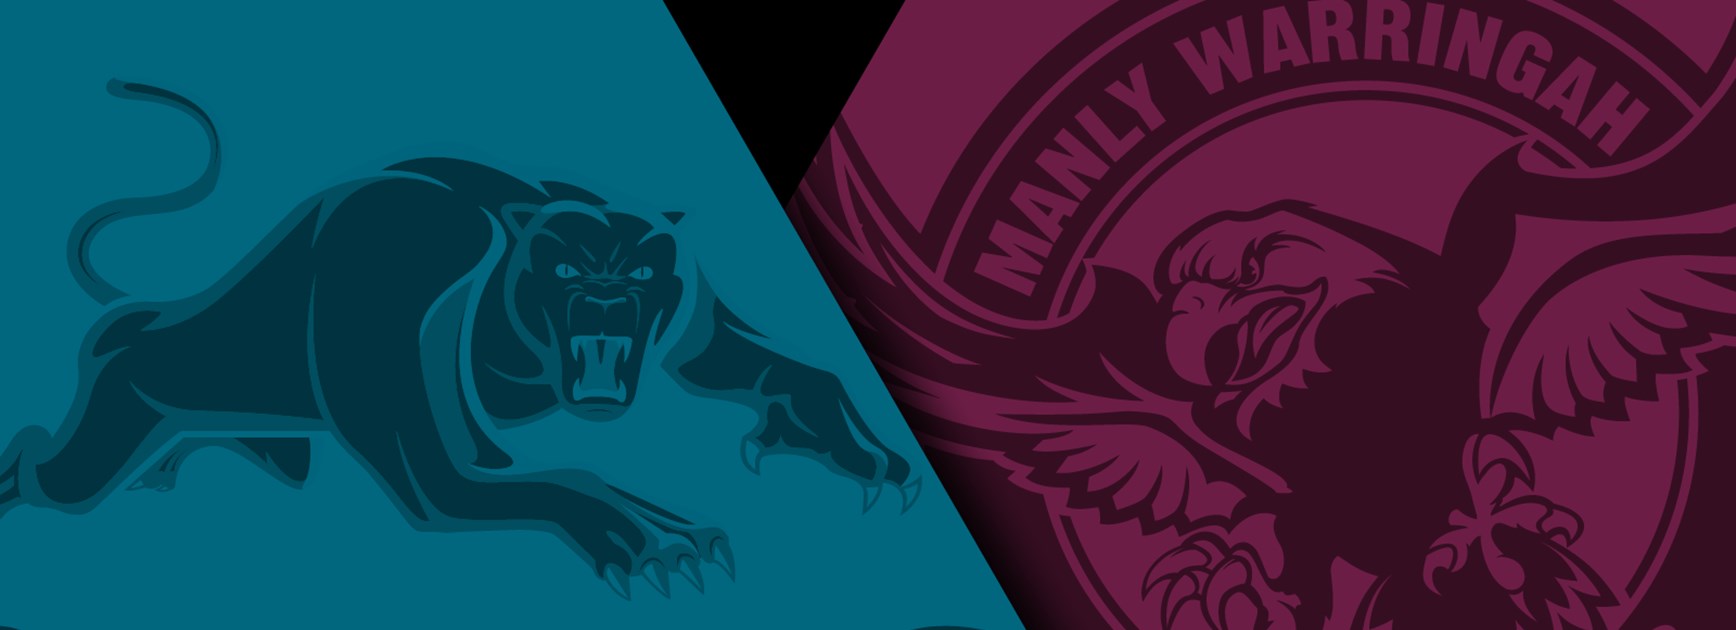 Panthers-Sea Eagles preview.